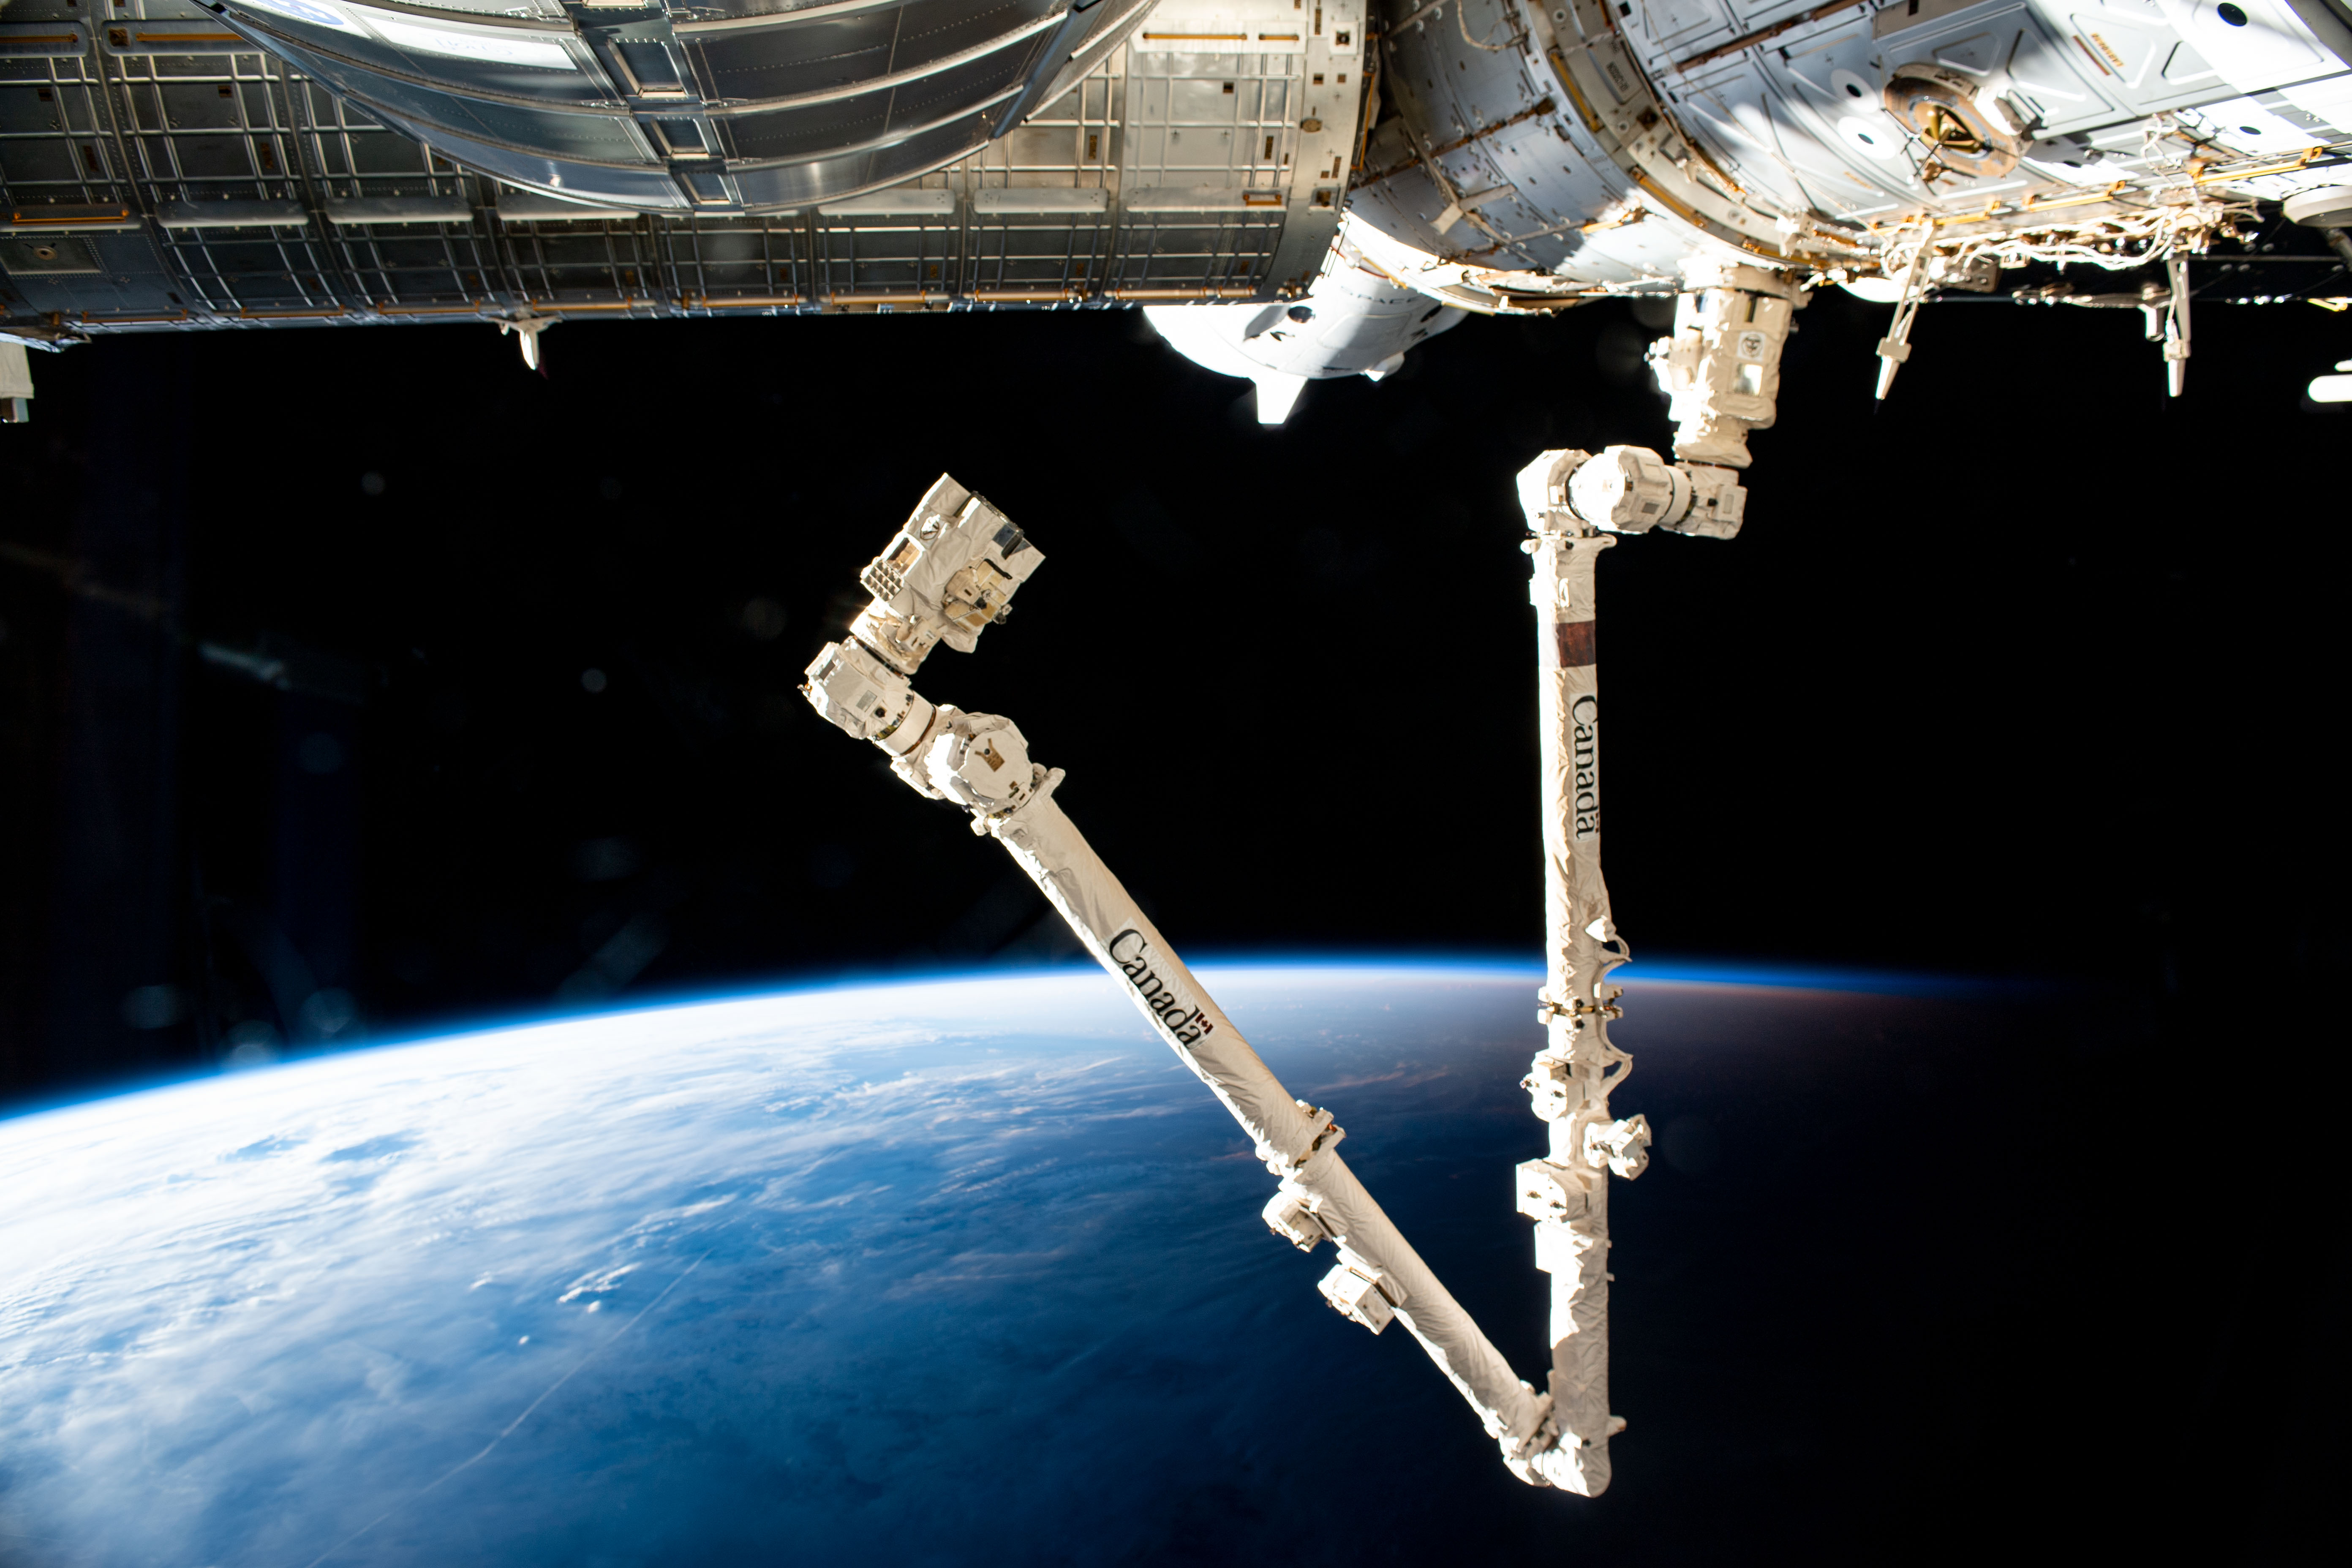 The Canadarm2 robotic arm, from the Canadian Space Agency, is pictured attached to the International Space Station.